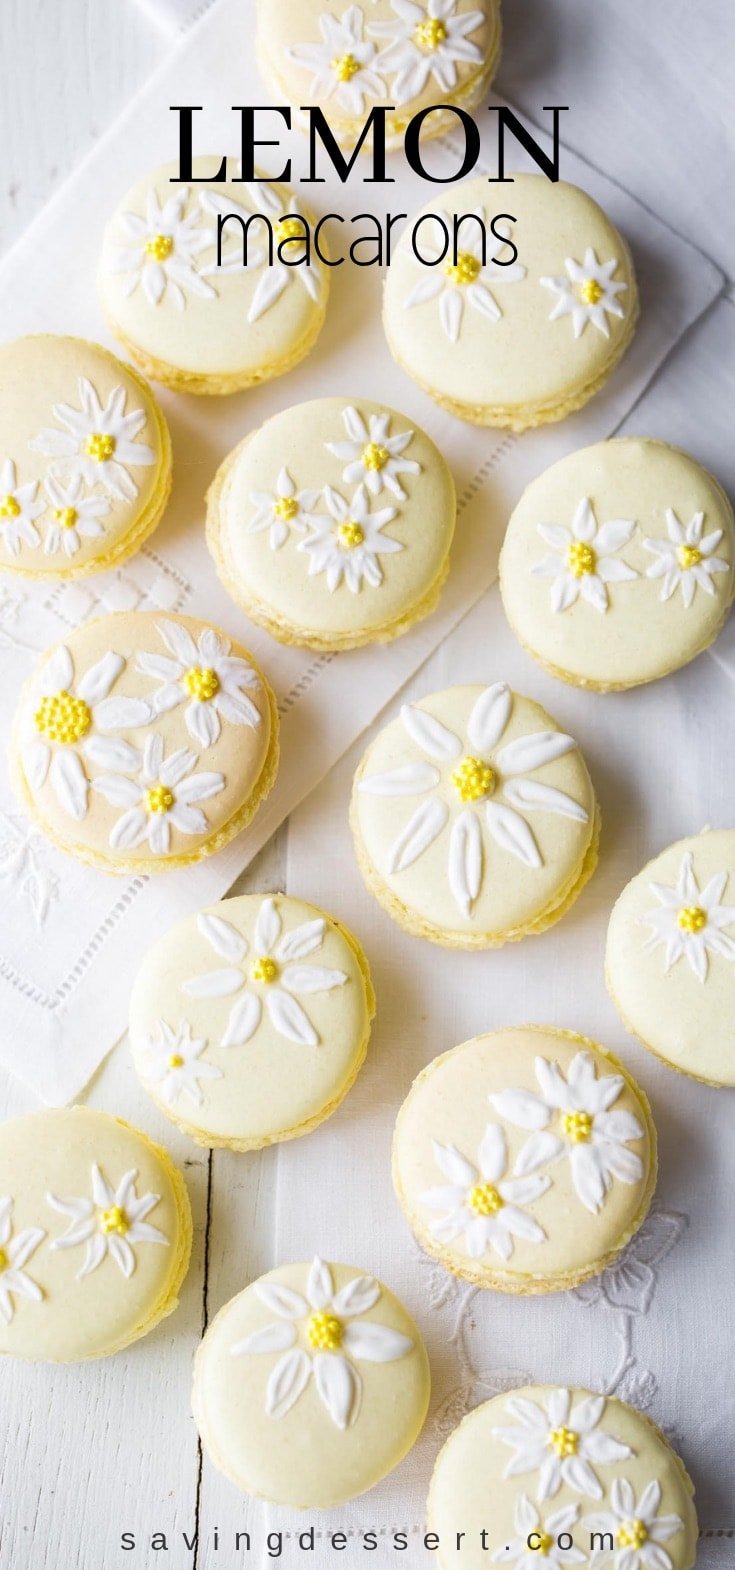 Lemon Macarons - brighten your day with these delicious cookies decorated with a few brushstrokes of royal icing and sprinkles to help usher in the first warm days of spring. #macarons #lemon #cookies #meringuecookies #lemonmacarons #Italianmacarons #decoratedmacaron #macaron